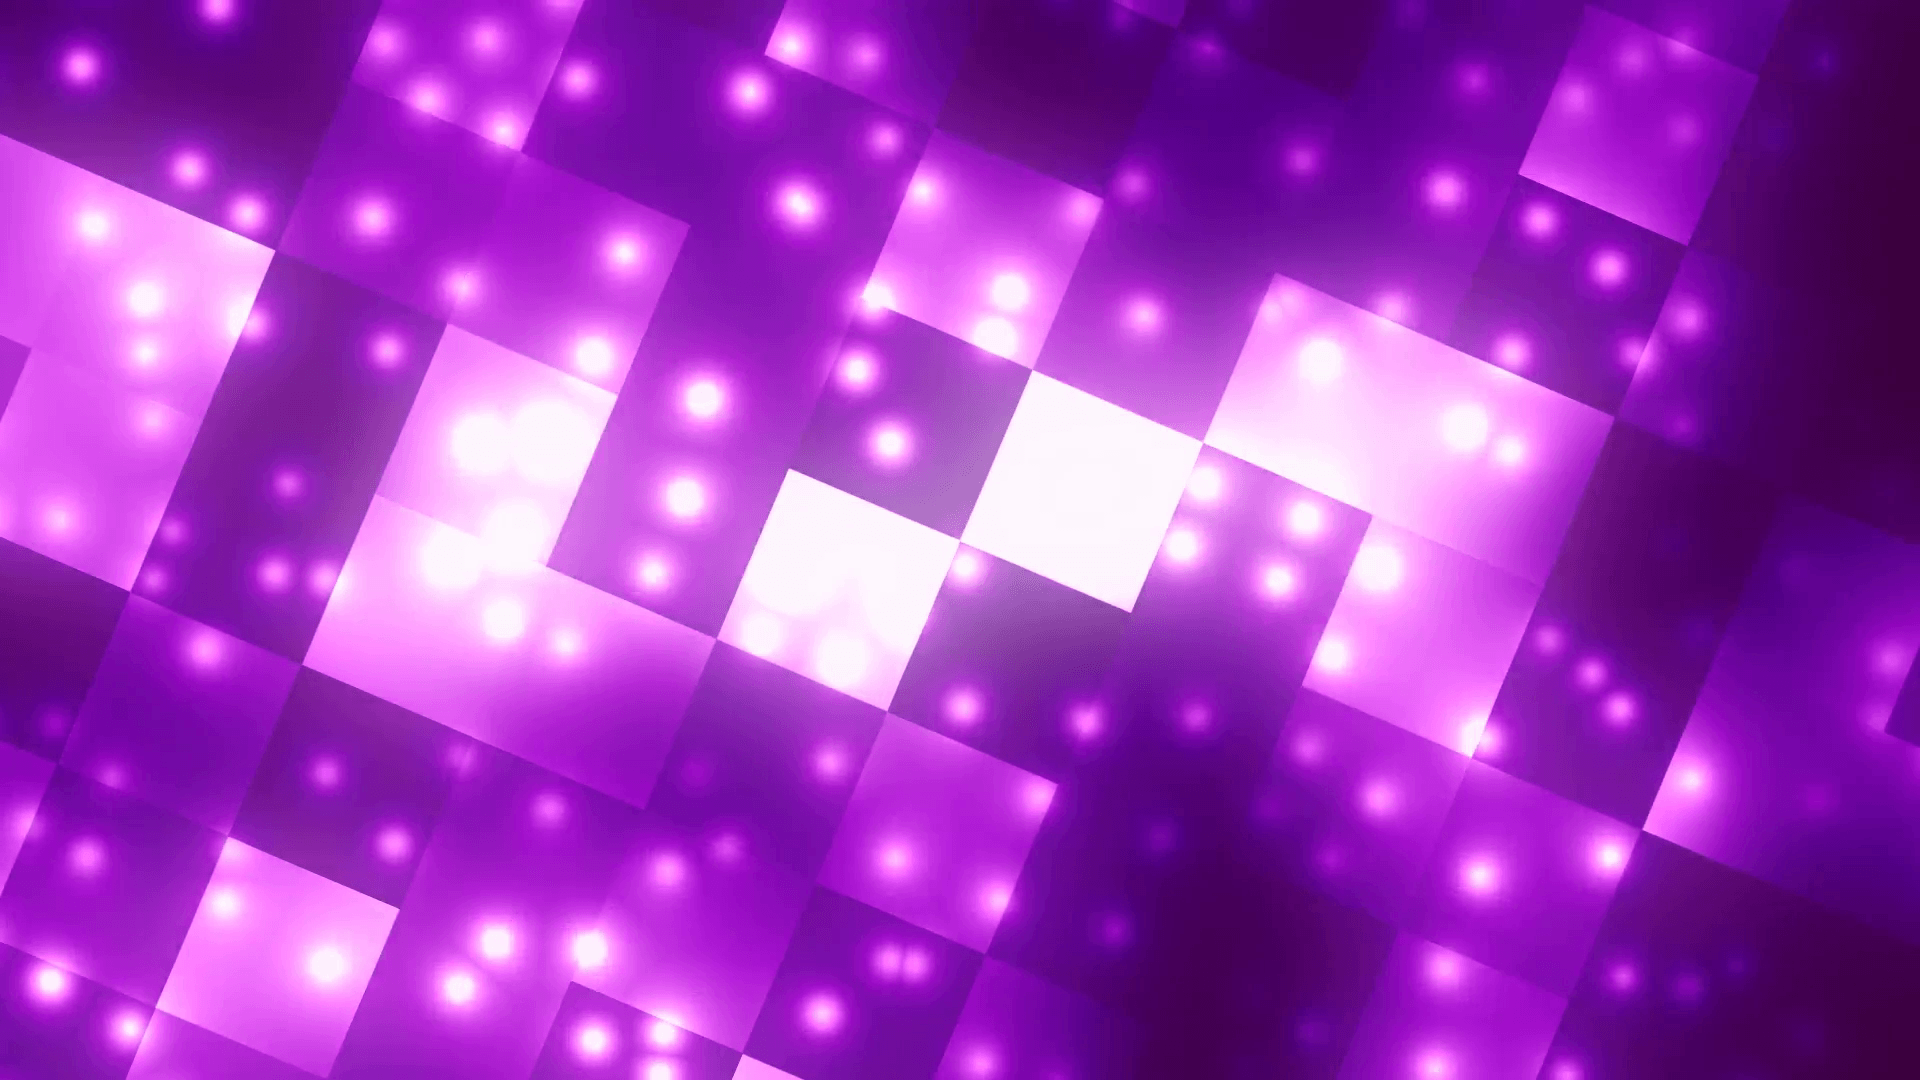 Dance Party Floor 1 Loopable Background Motion Background